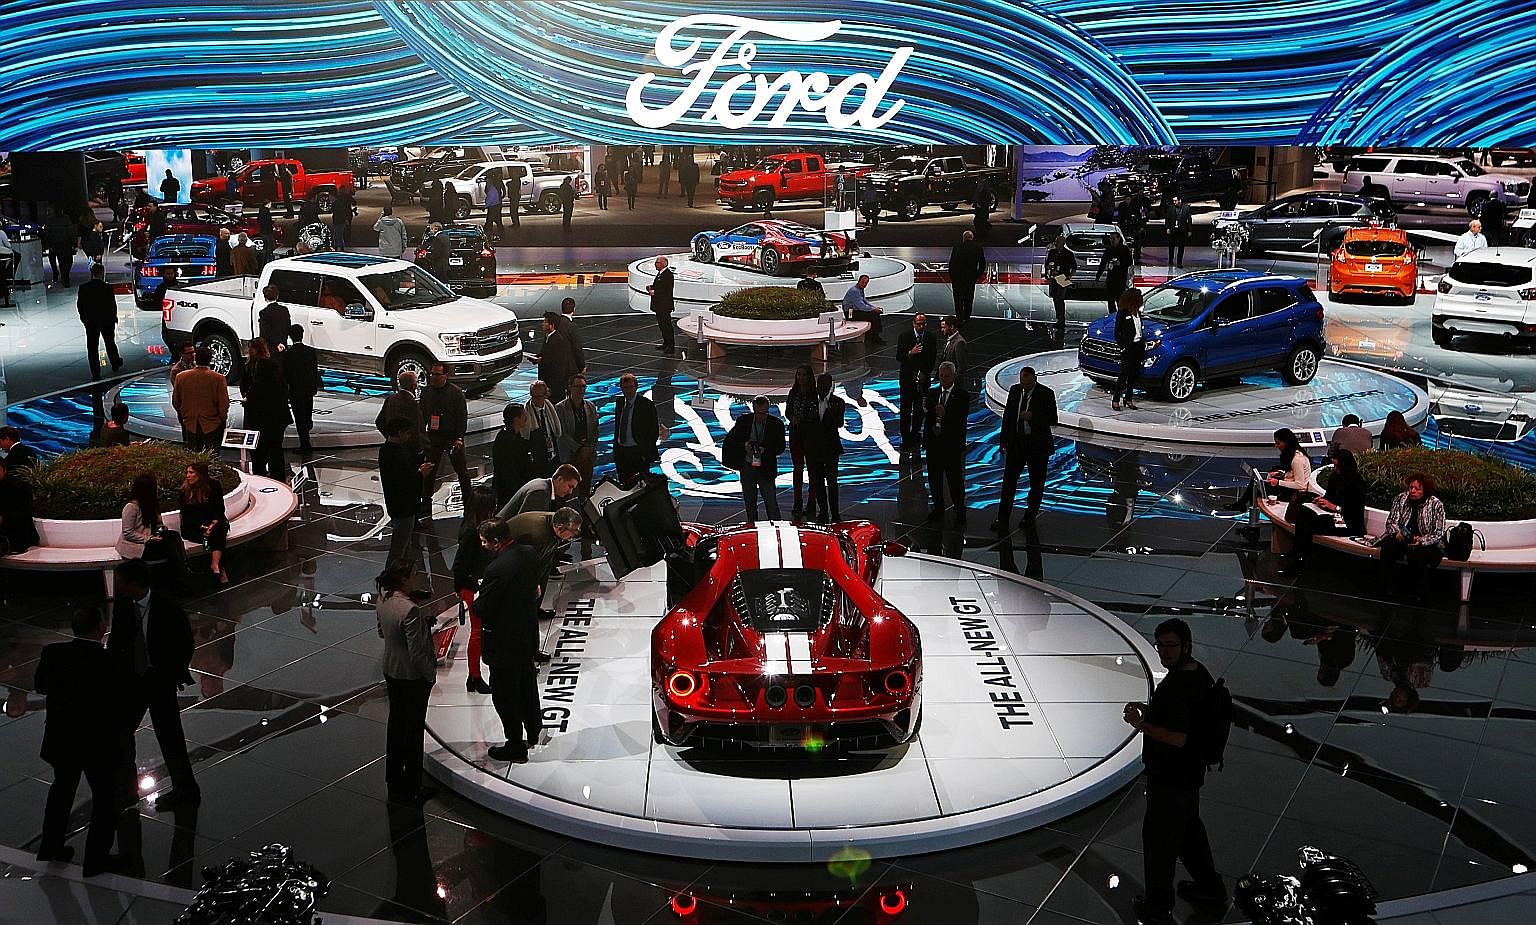 The Ford display at the North American International Auto Show in Detroit, Michigan, on Tuesday. The automaker's plan to invest $1 billion to build electric vehicles and create 700 jobs in Michigan is the latest sign that American companies expect th